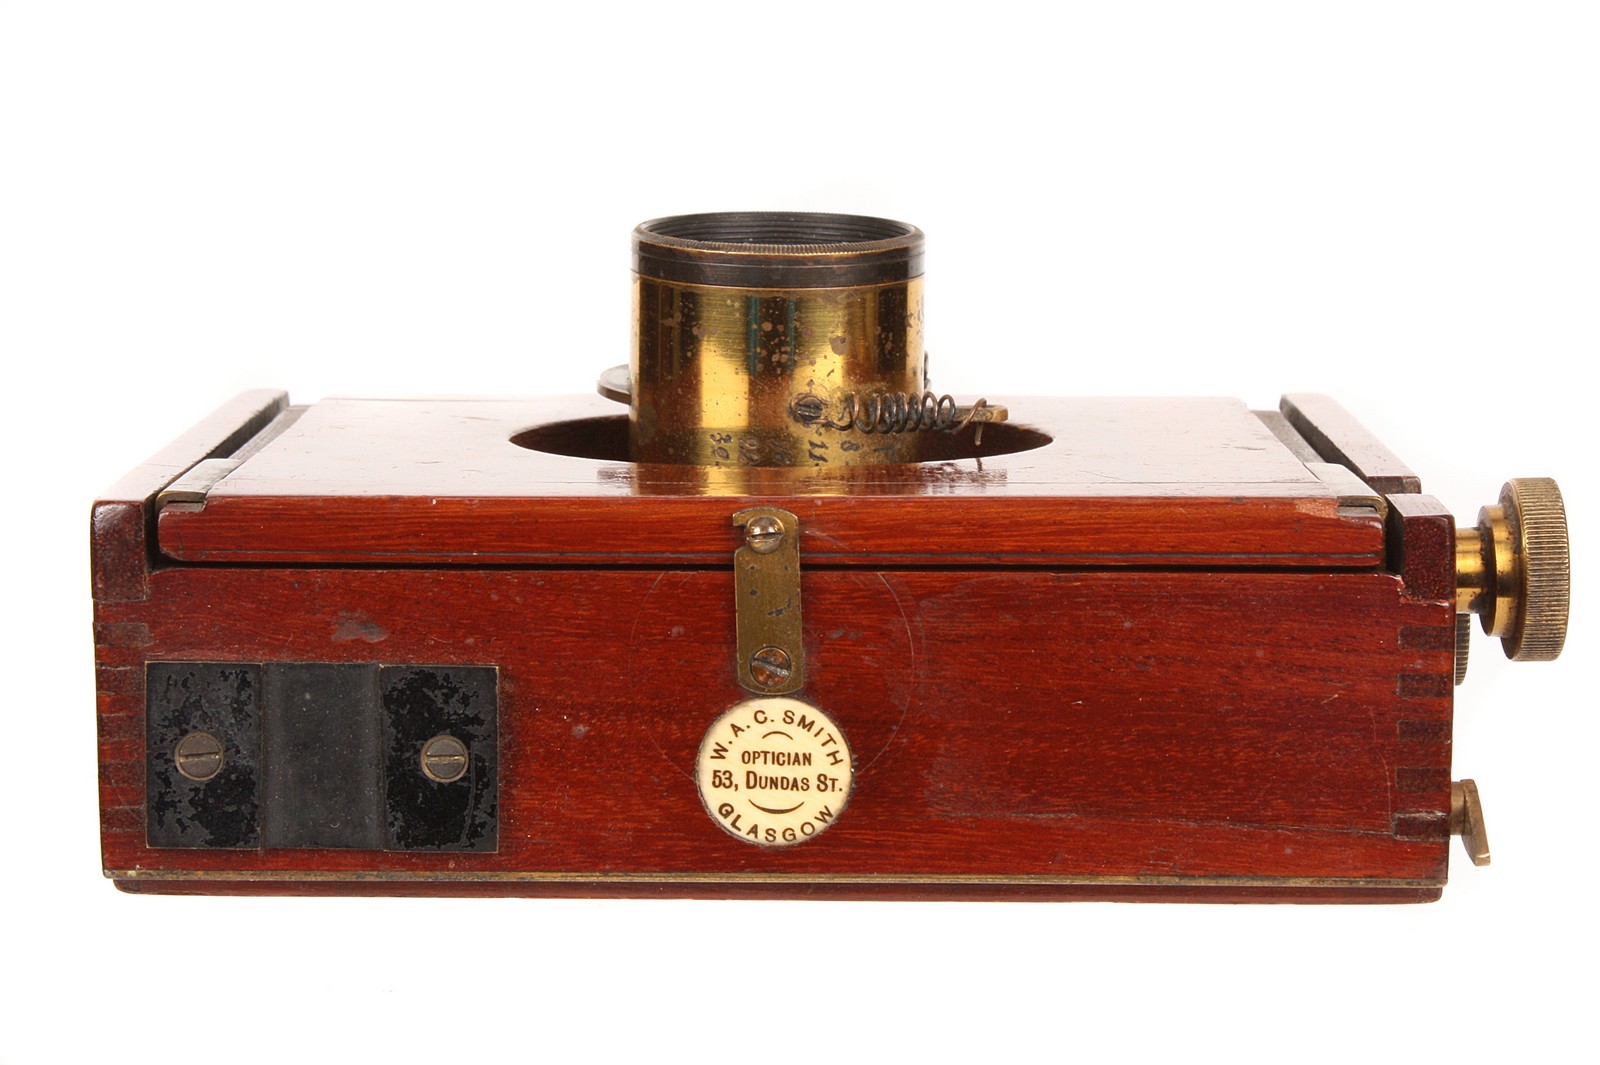 A W. A. C. Smith Mahogany Quarter-Plate Camera, 3x4”, serial no. 56, with unmarked f/8 brass lens, - Image 3 of 3